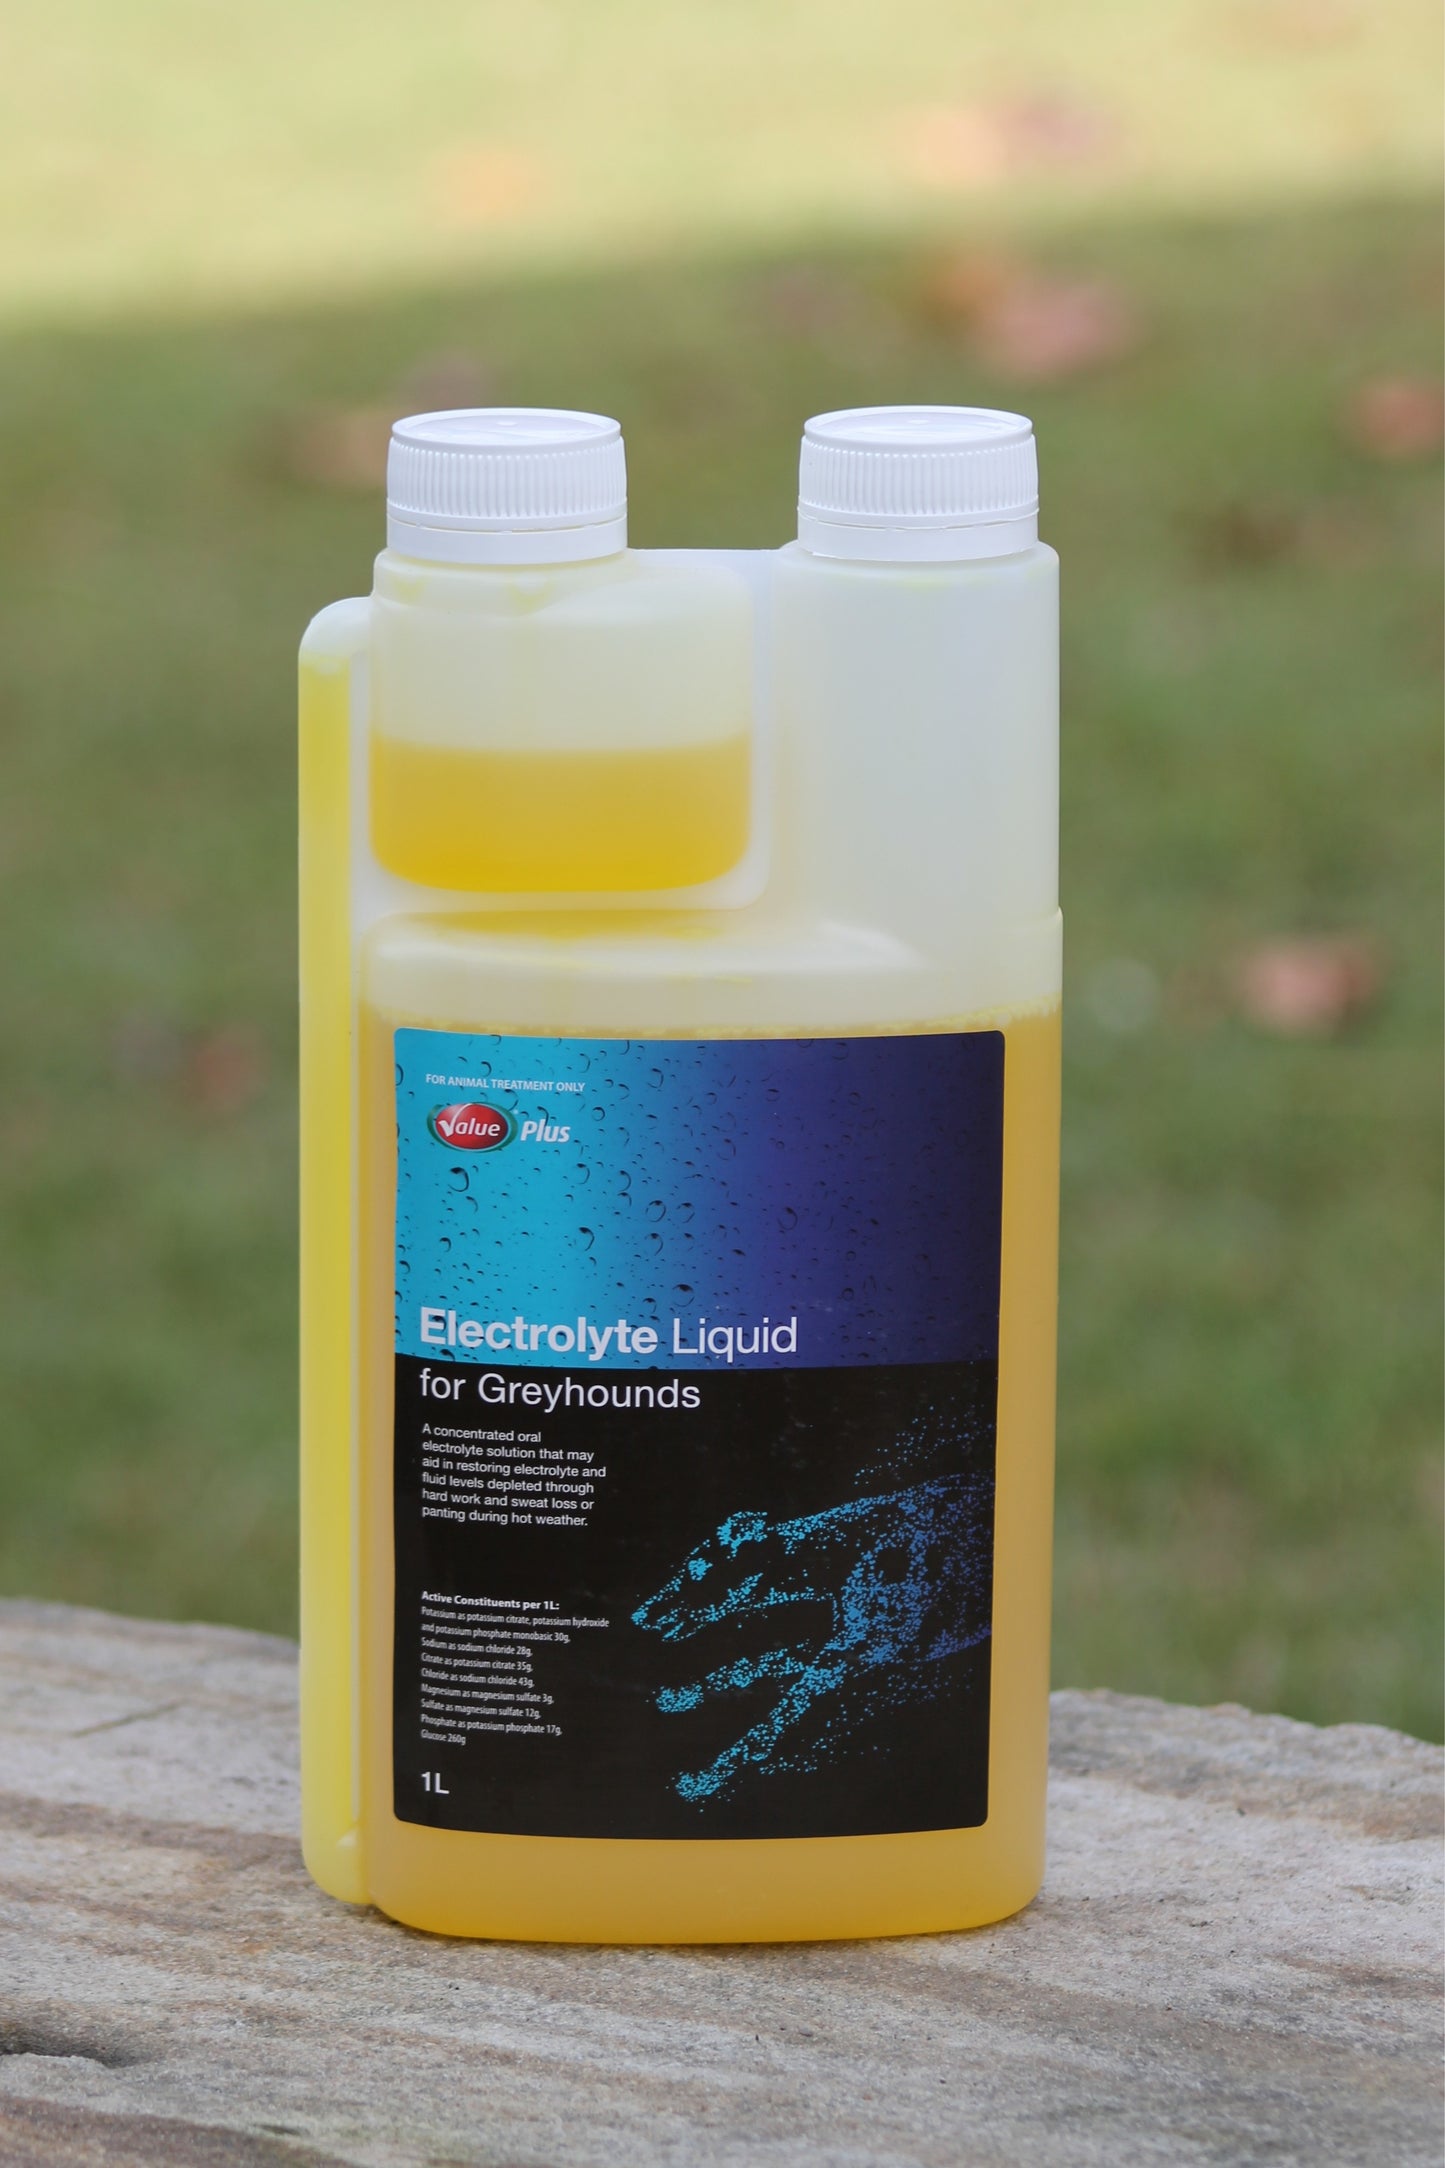 Electrolyte Liquid for Greyhounds